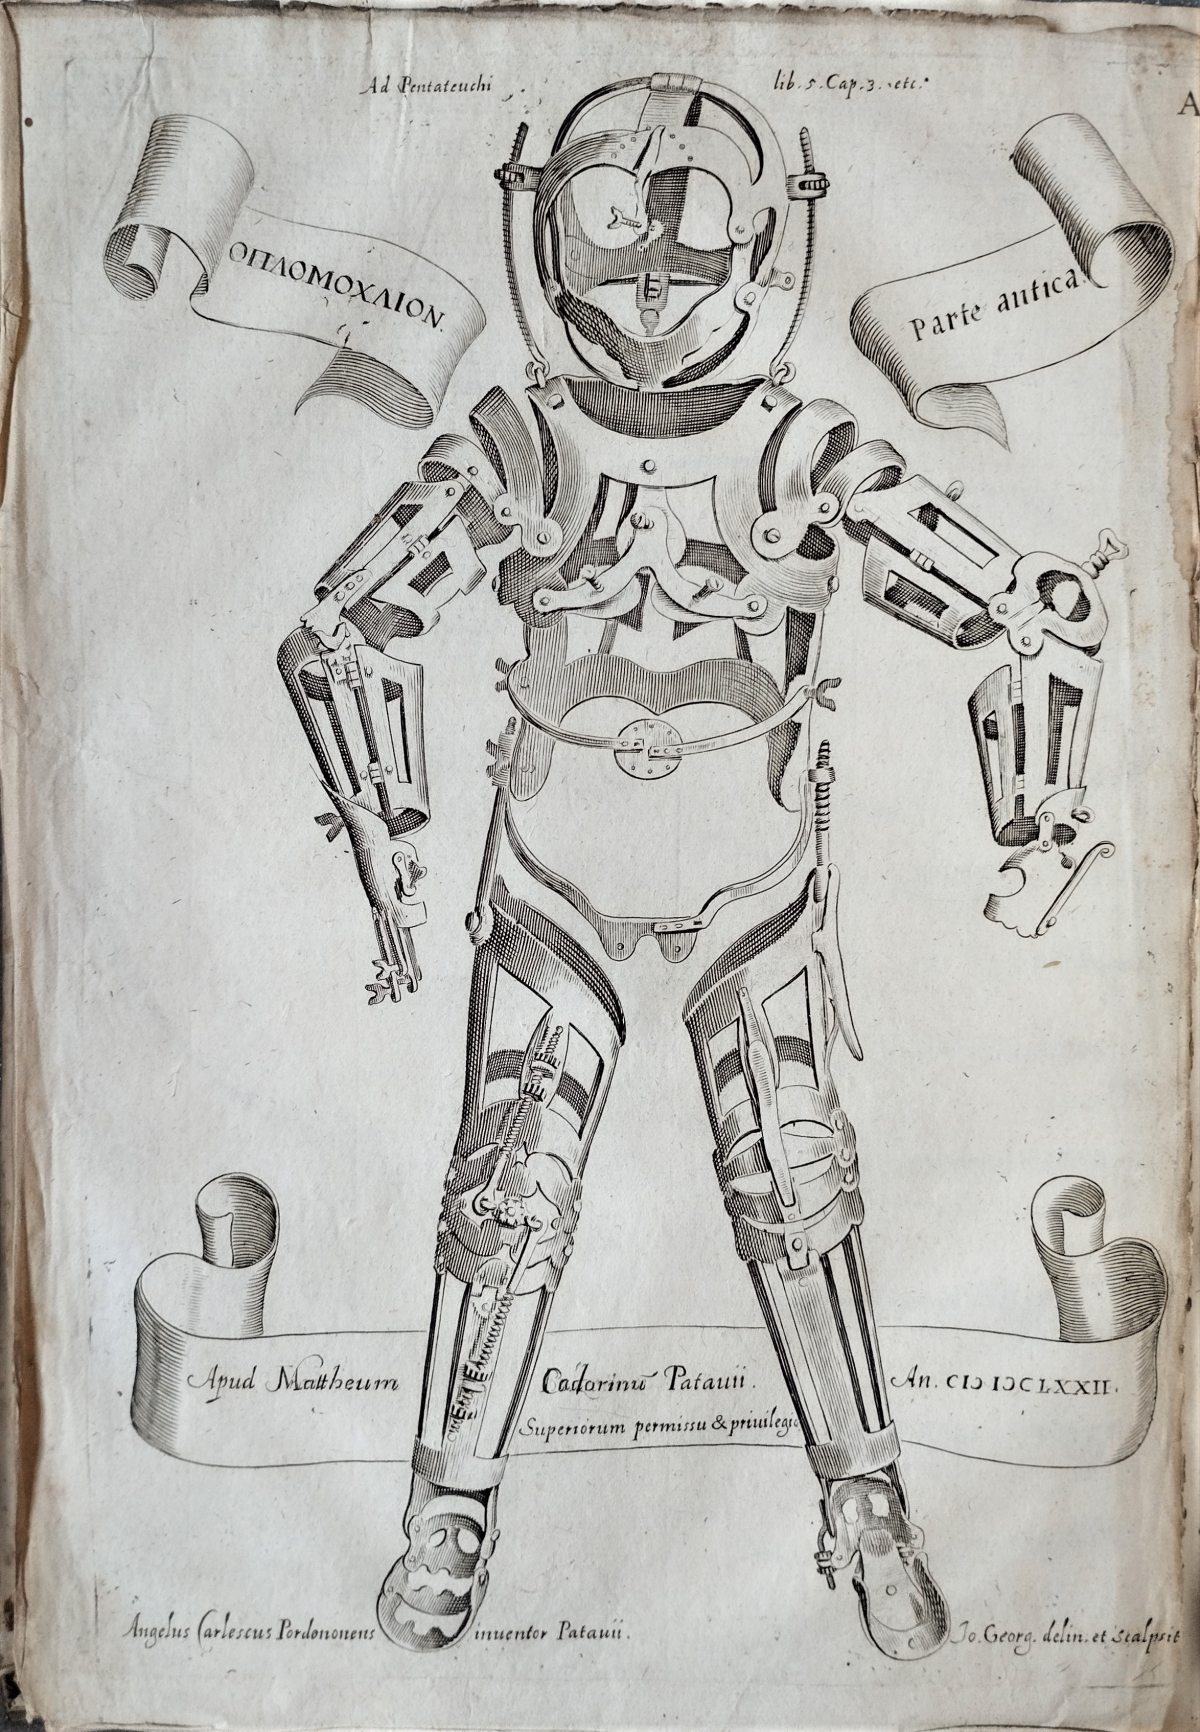 Engraved illustration of a complete suit of jointed metal orthopaedic braces, viewed from the front.